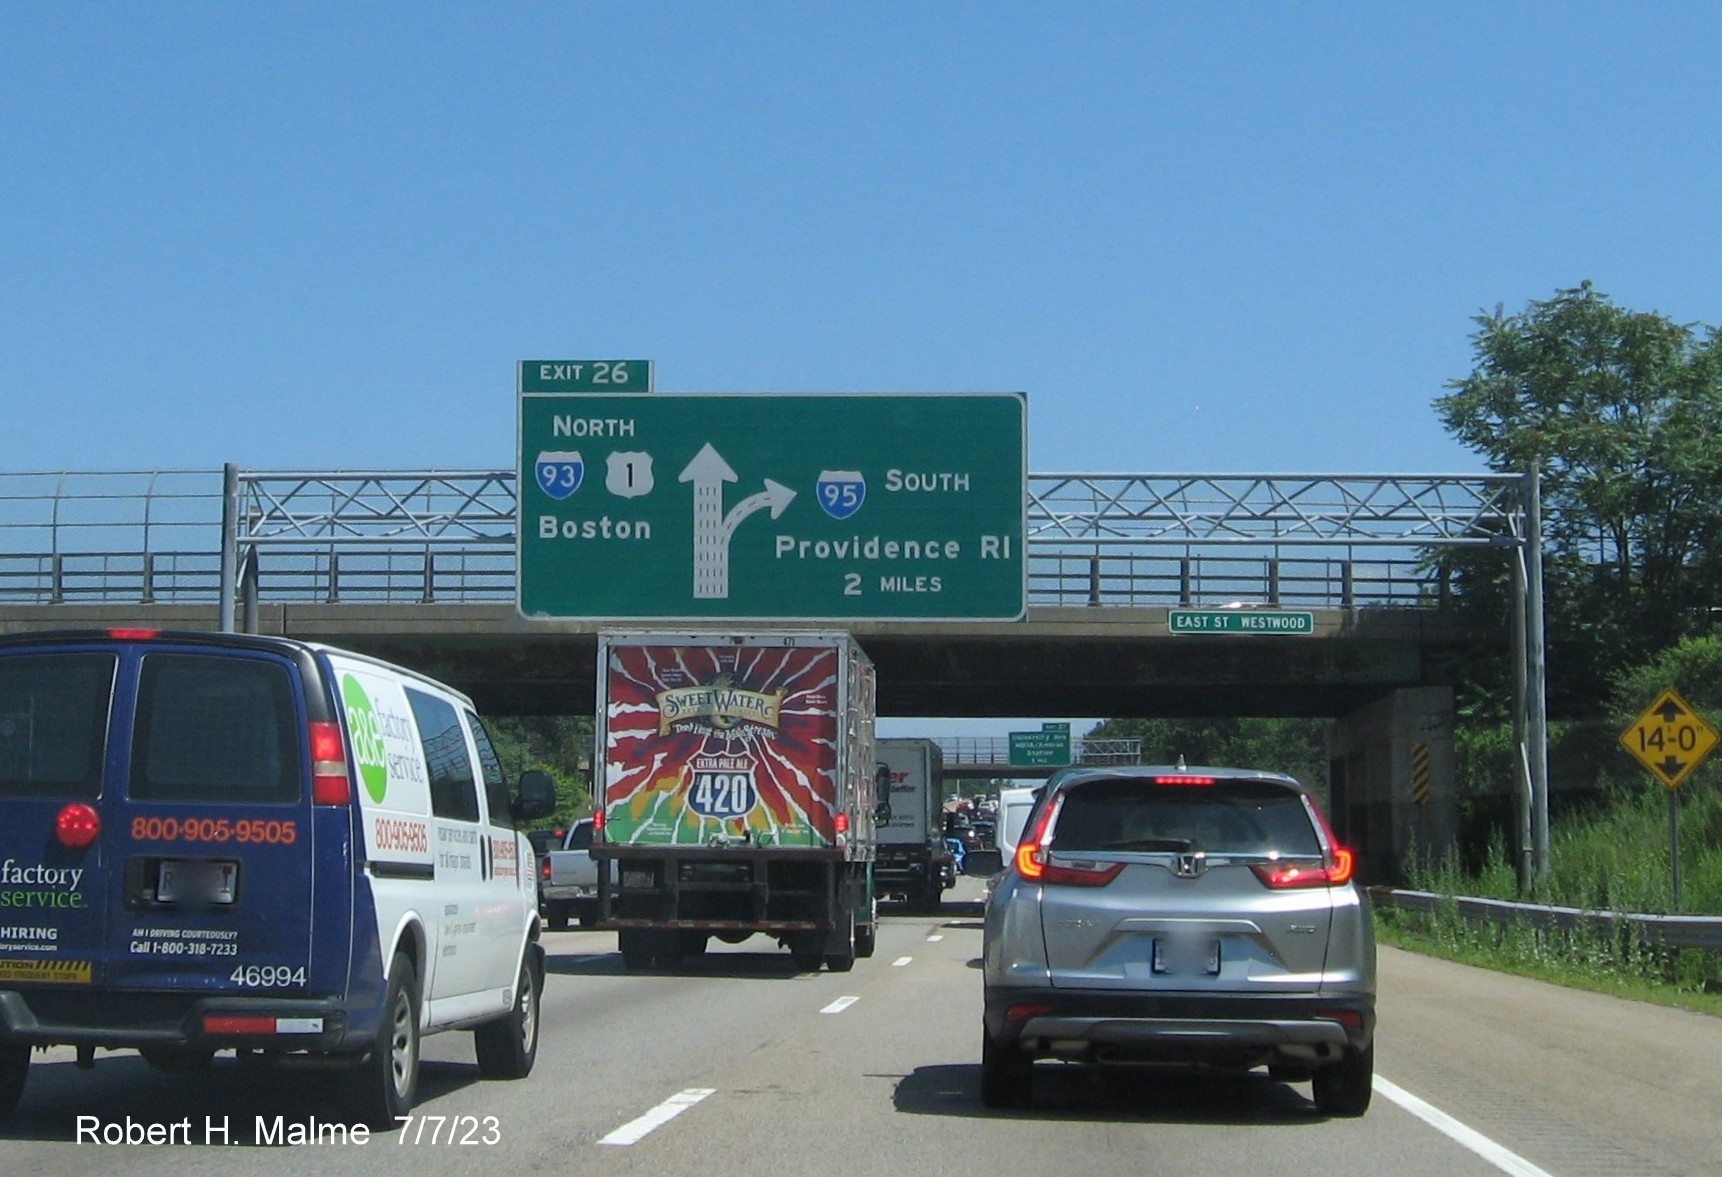 Image of 2 miles advance overhead diagrammatic sign for I-93/US 1 North exit with yellow Left Exit tab removed on I-95/MA 128 South in Westwood, July 2023